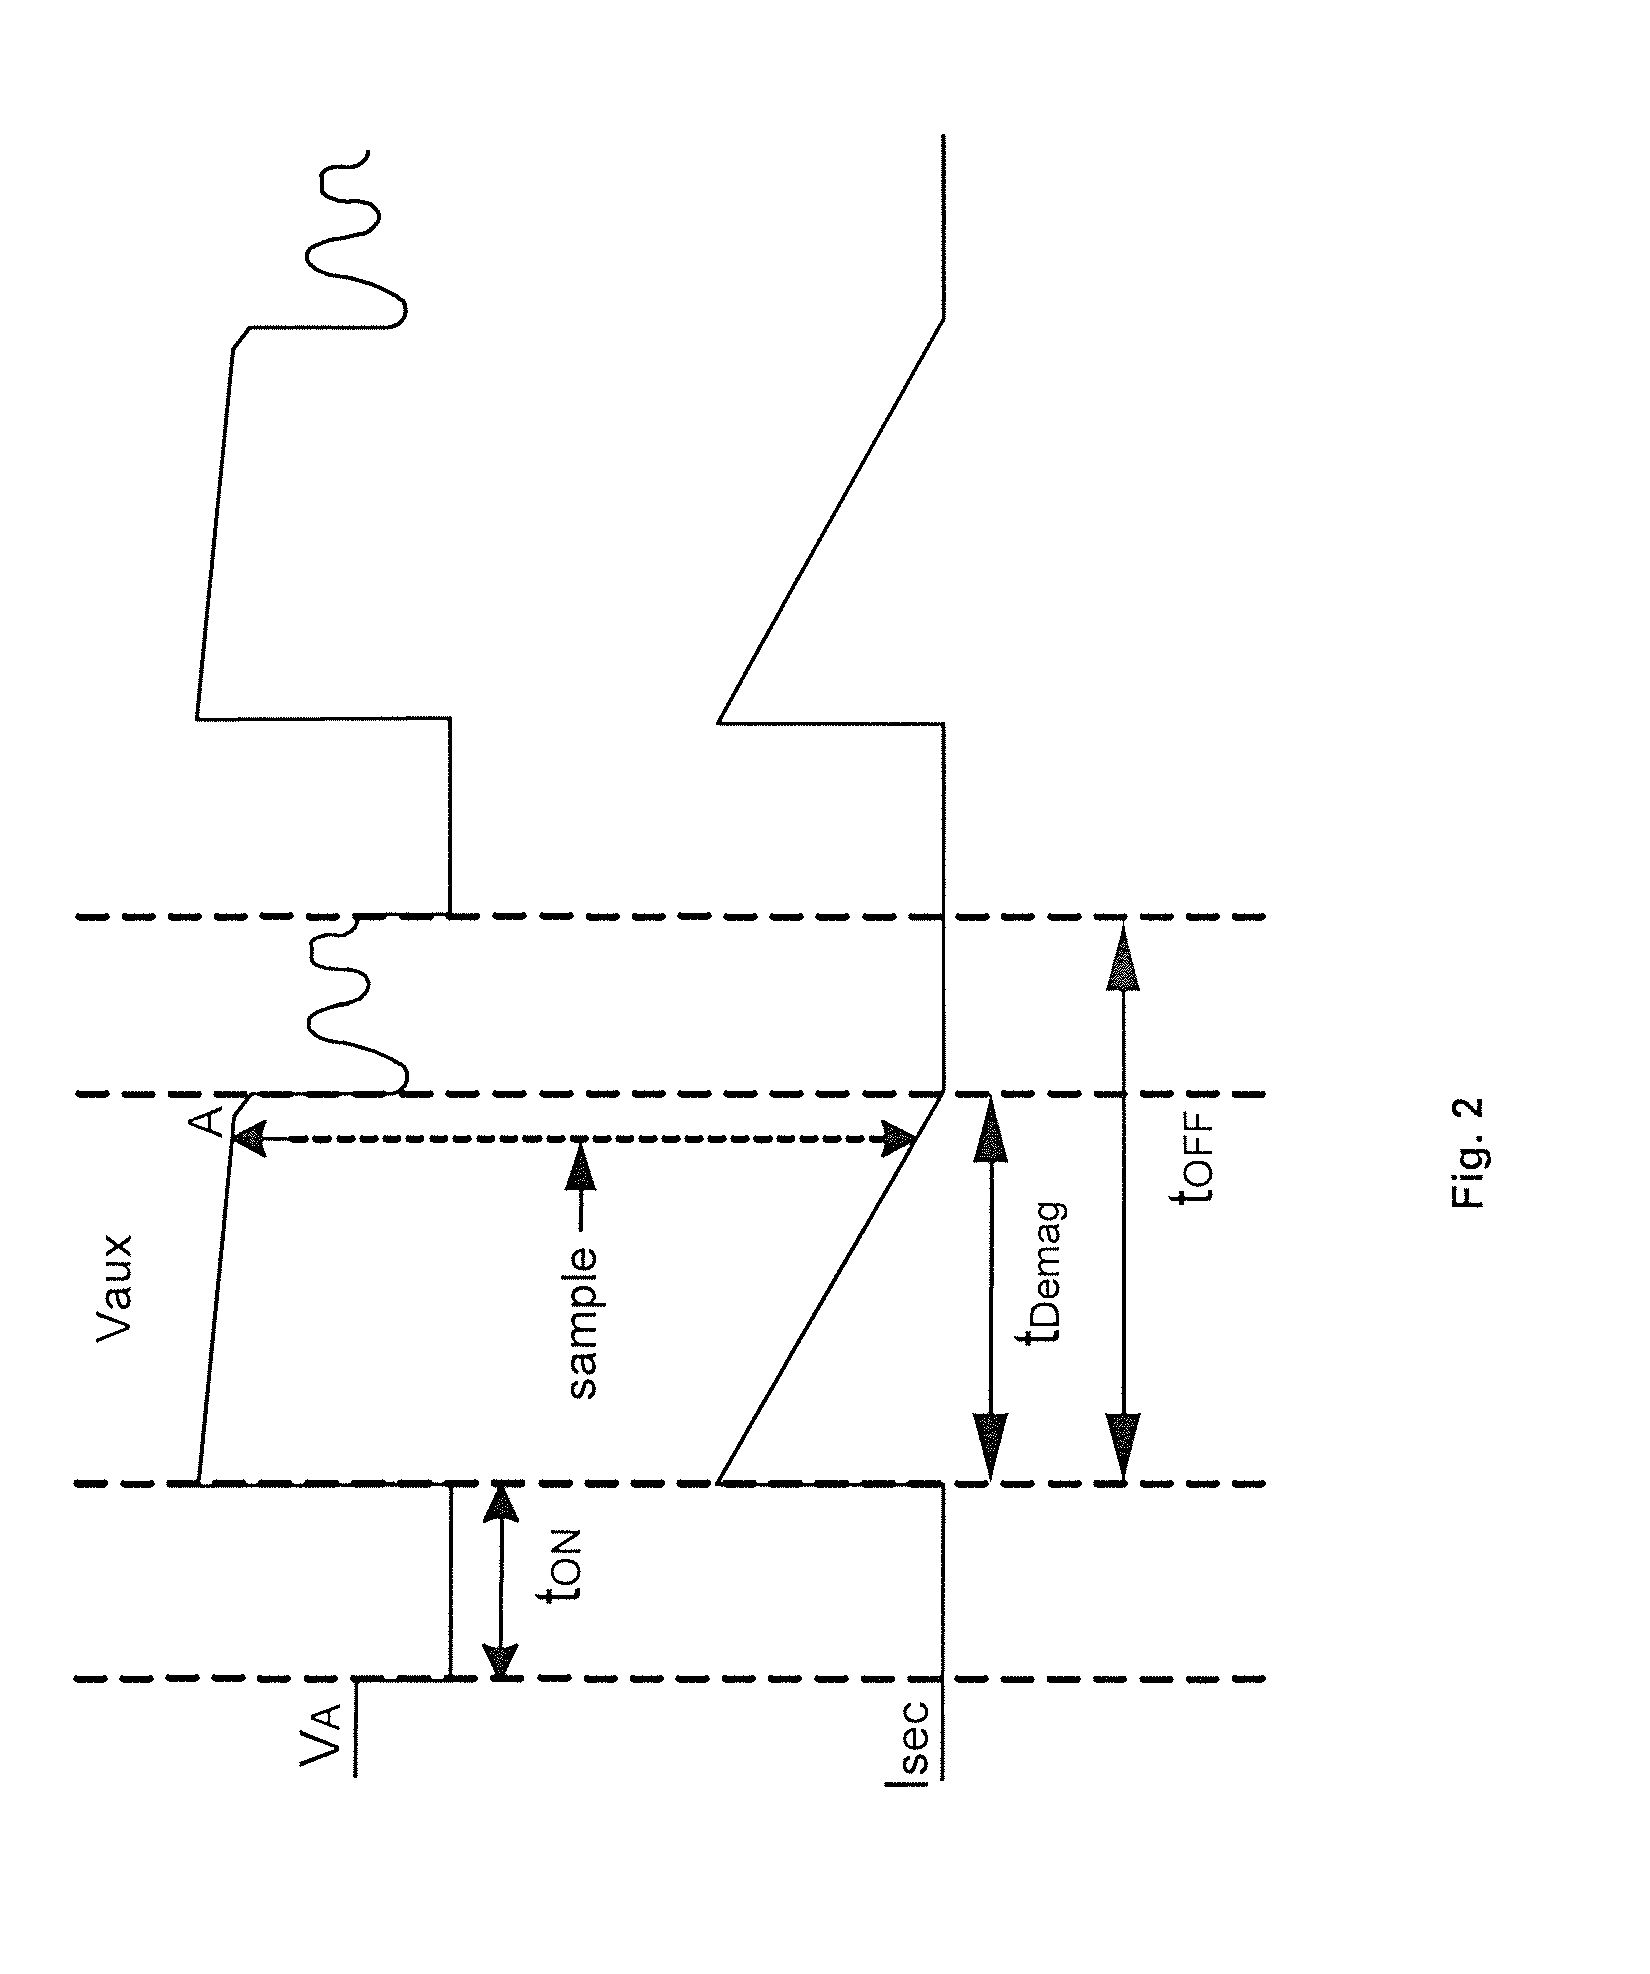 Systems and methods for load compensation with primary-side sensing and regulation for flyback power converters